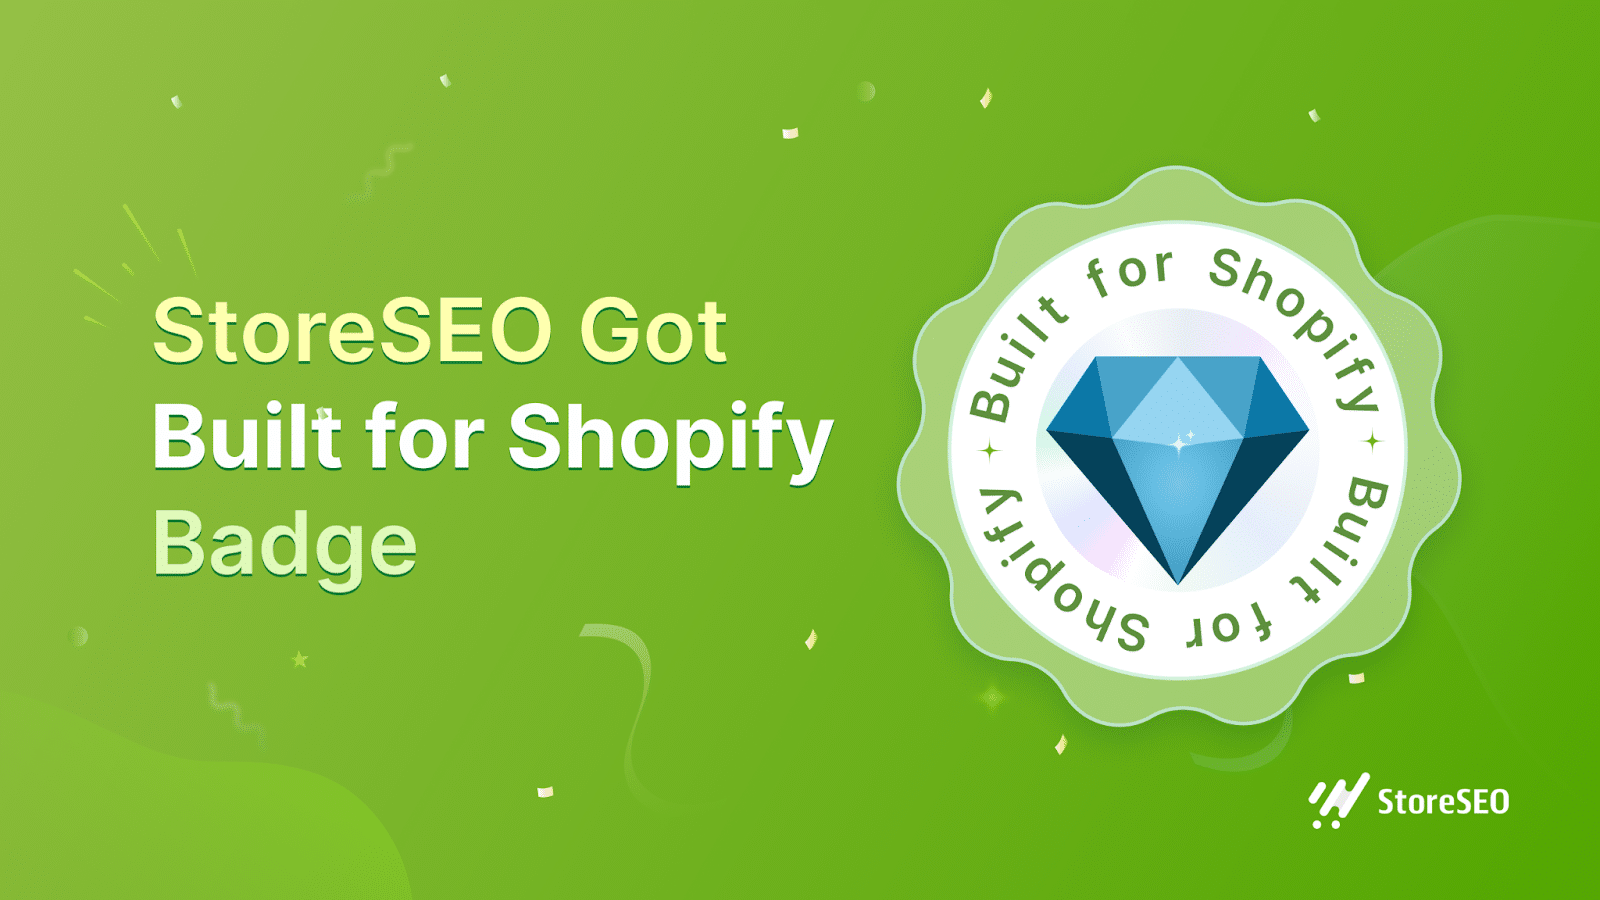 StoreSEO Got Built for Shopify Badge